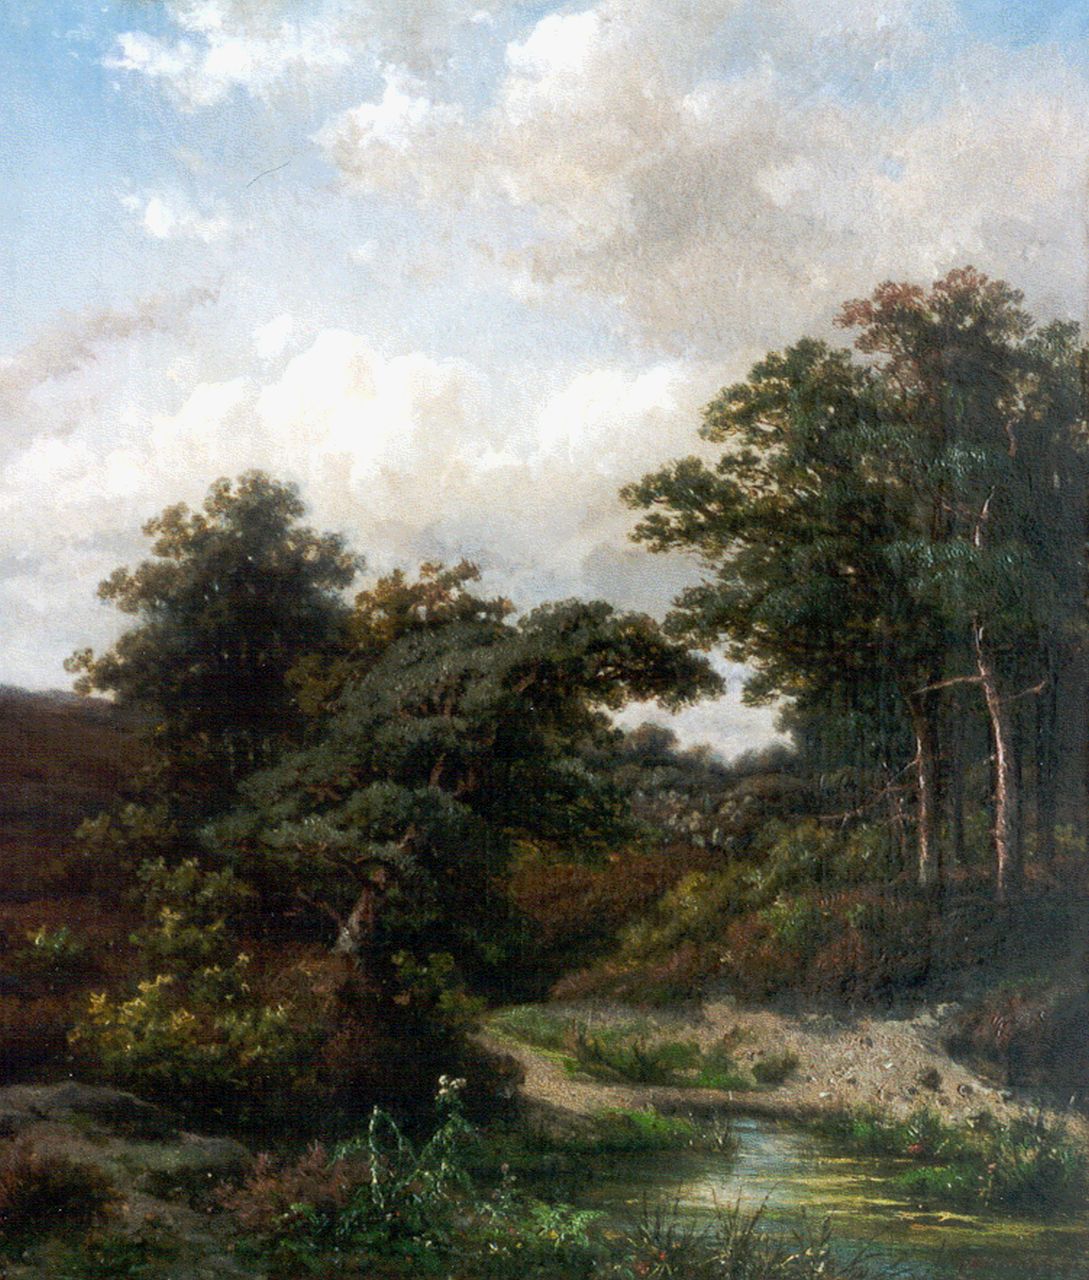 Meiners C.H.  | Claas Hendrik Meiners, A forest pond, Oosterbeek, oil on canvas 39.2 x 33.7 cm, signed l.r.